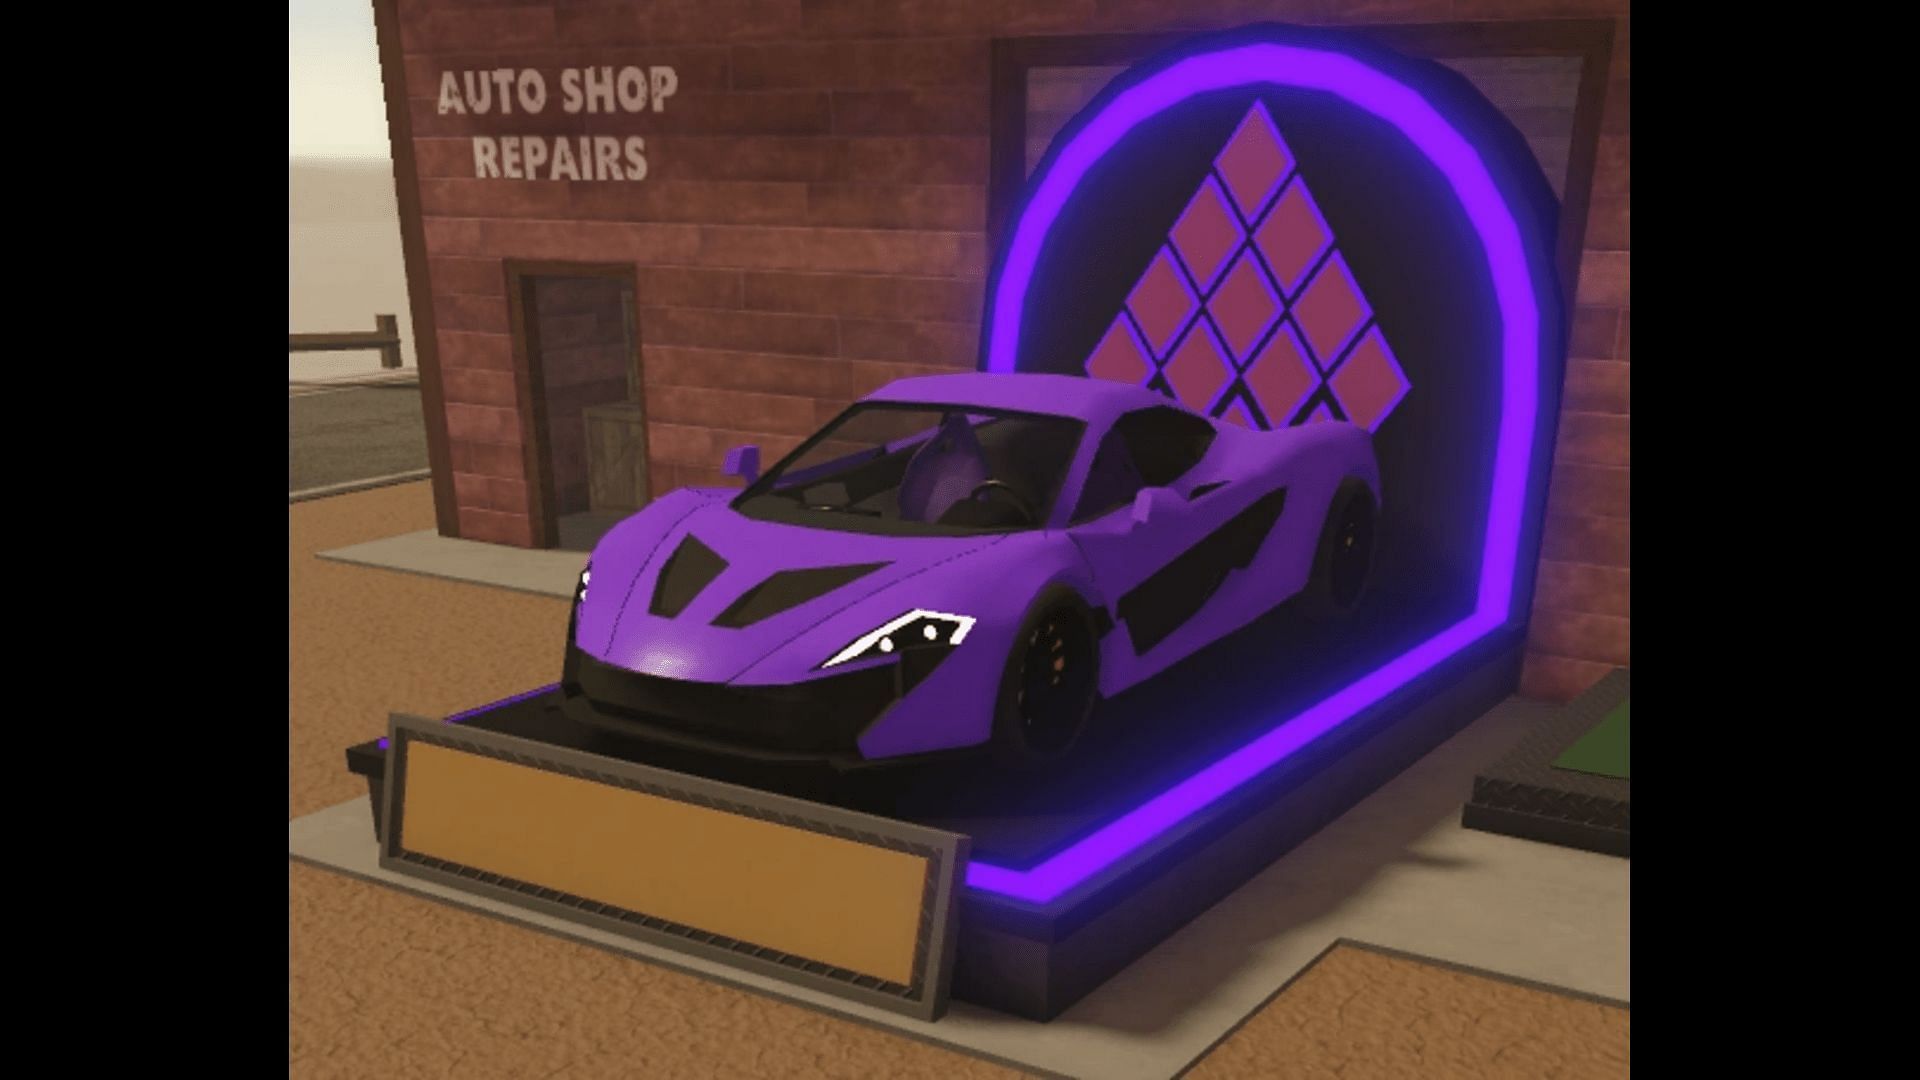 The R1702 based on Mclaren P1 in A Dusty Trip (Image via Roblox)